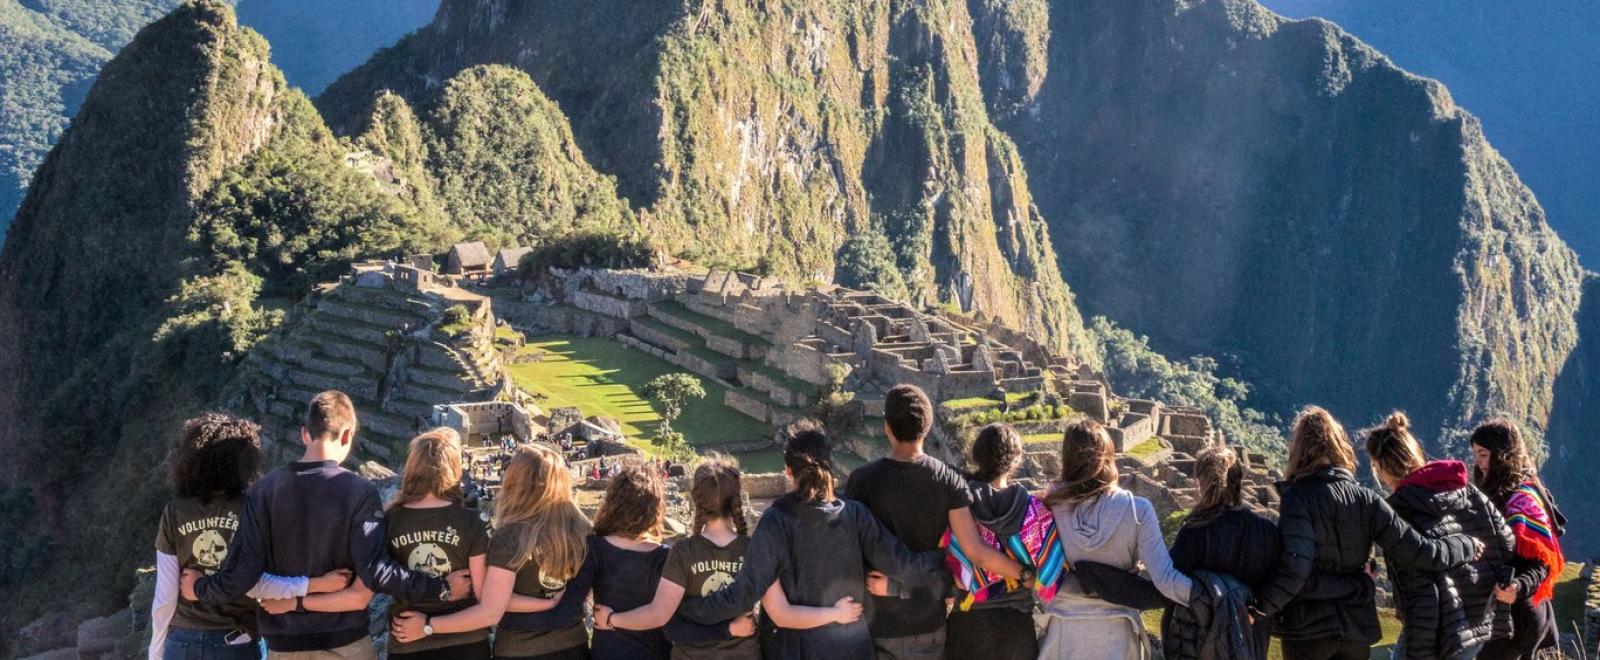 A group on a volunteer trip with Projects Abroad visits Machu Picchu over a weekend.